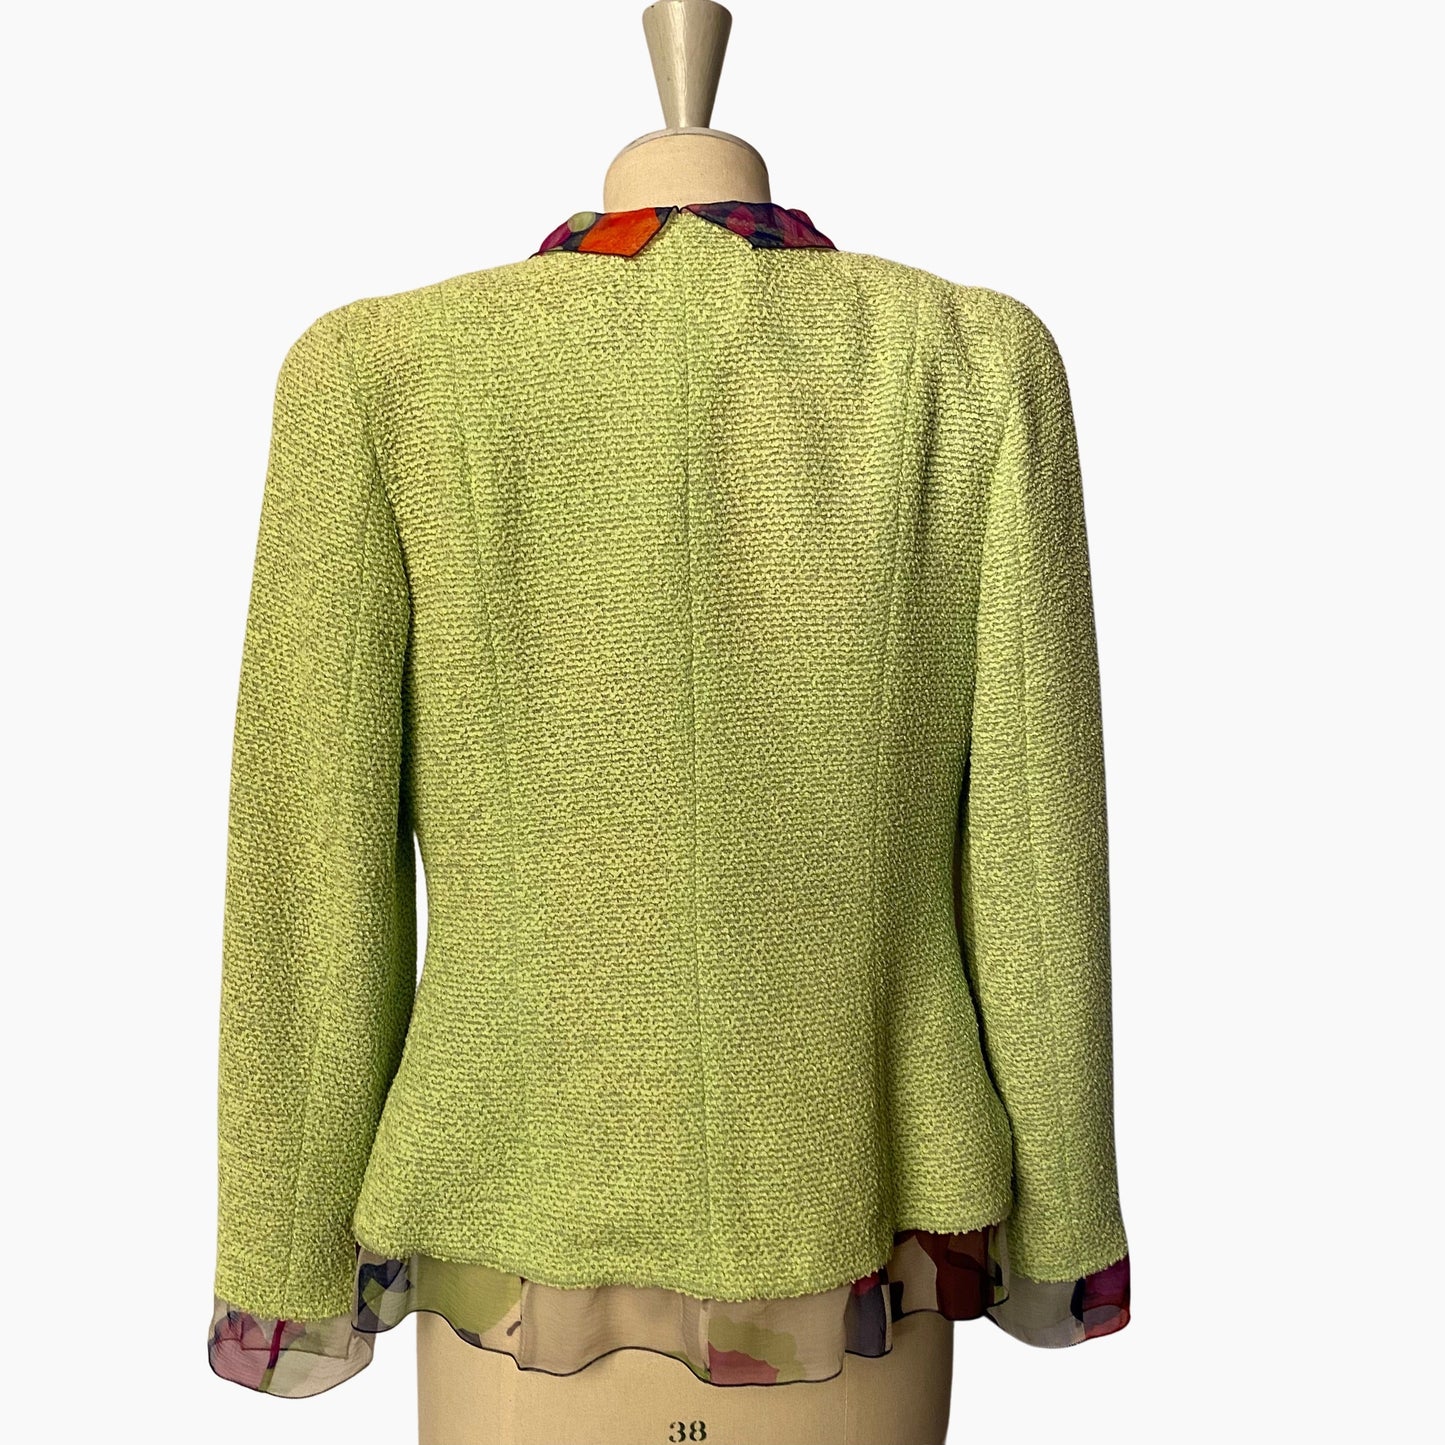 Lysis vintage Chanel lime green floral jacket - XS - Spring 2000